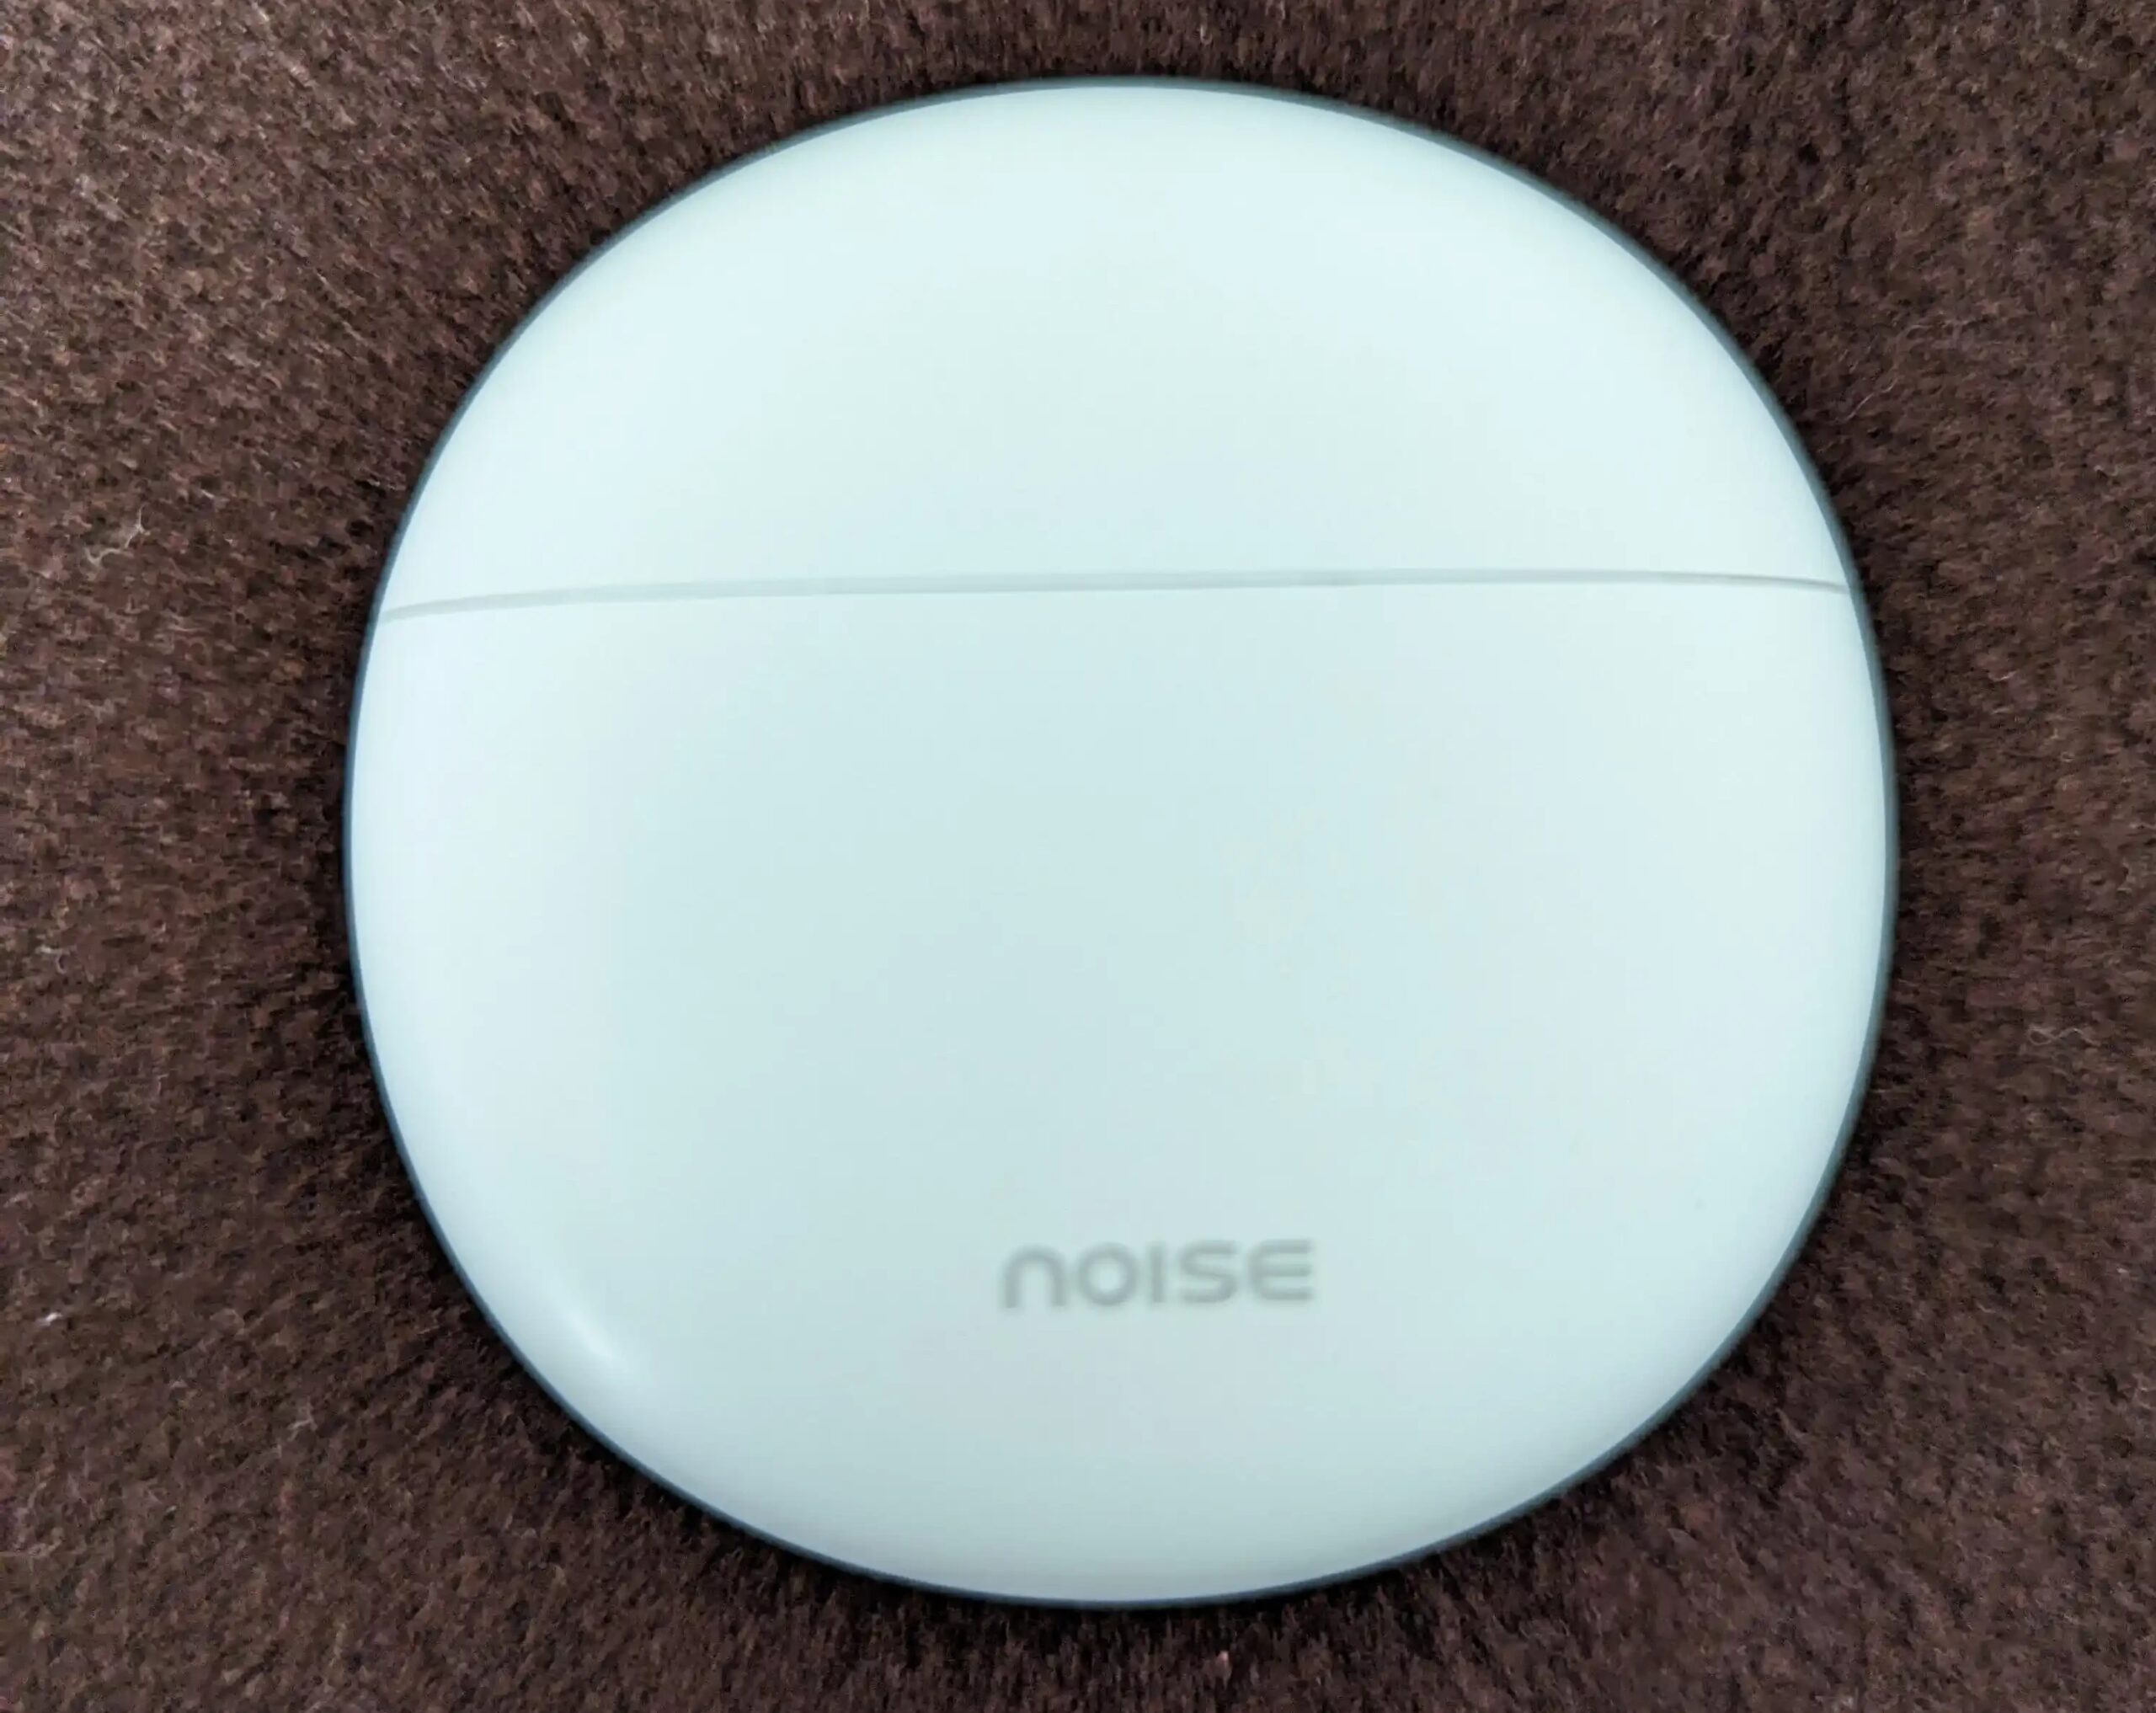 Noise EarBuds VS104 Pro Review